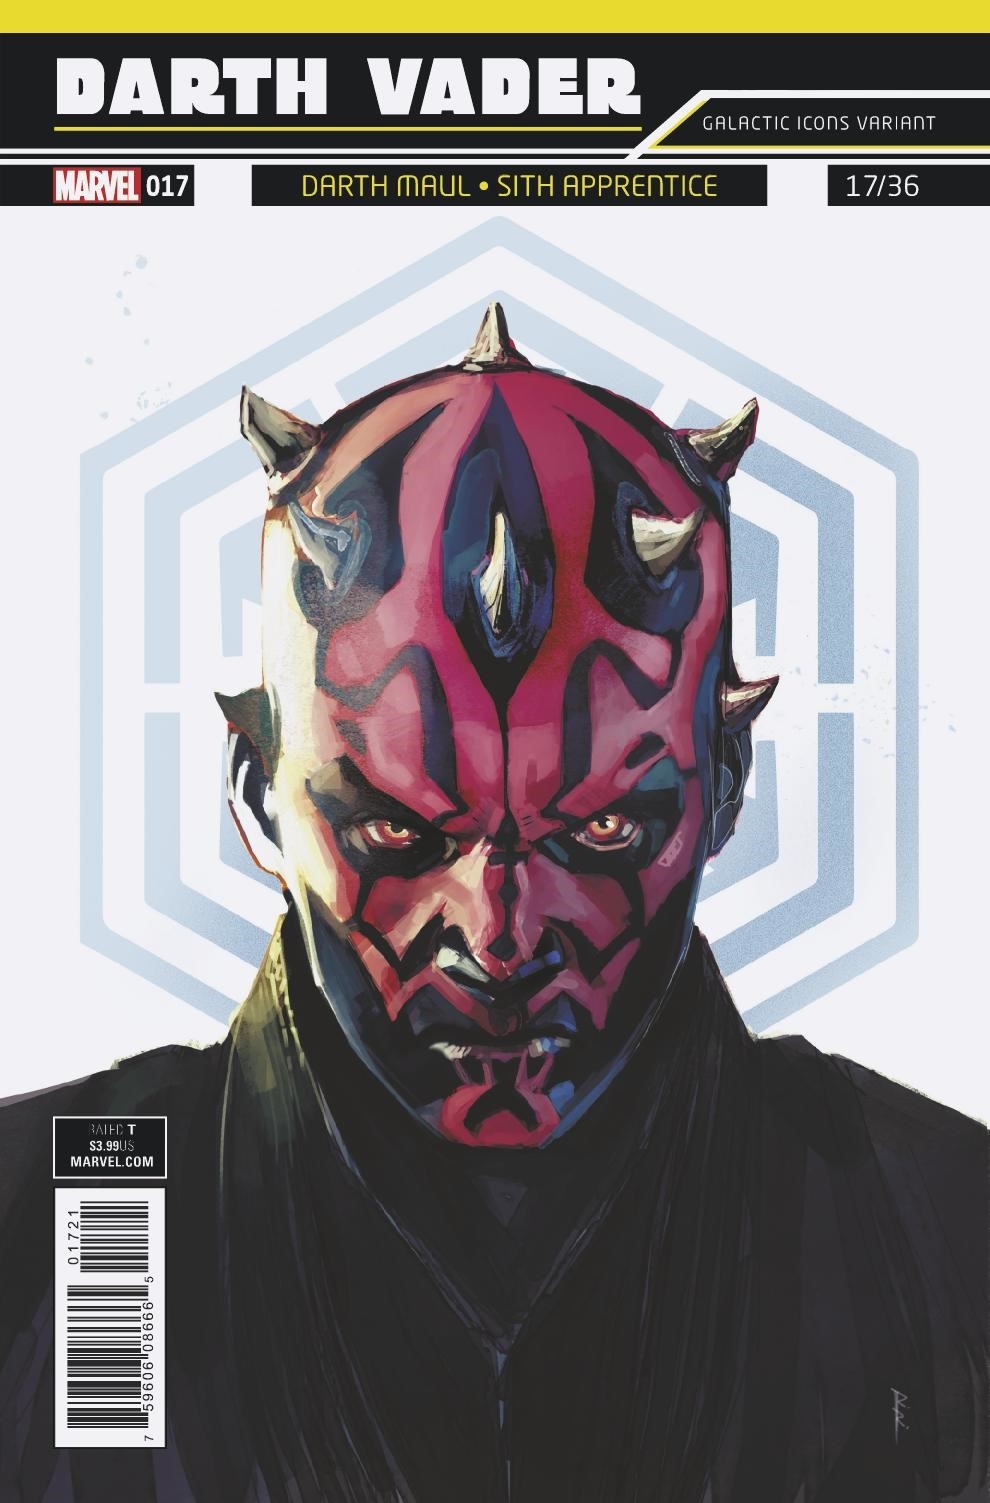 Darth Vader #17 (Rod Reis Galactic Icon "Darth Maul" Variant Cover) (13.06.2018)